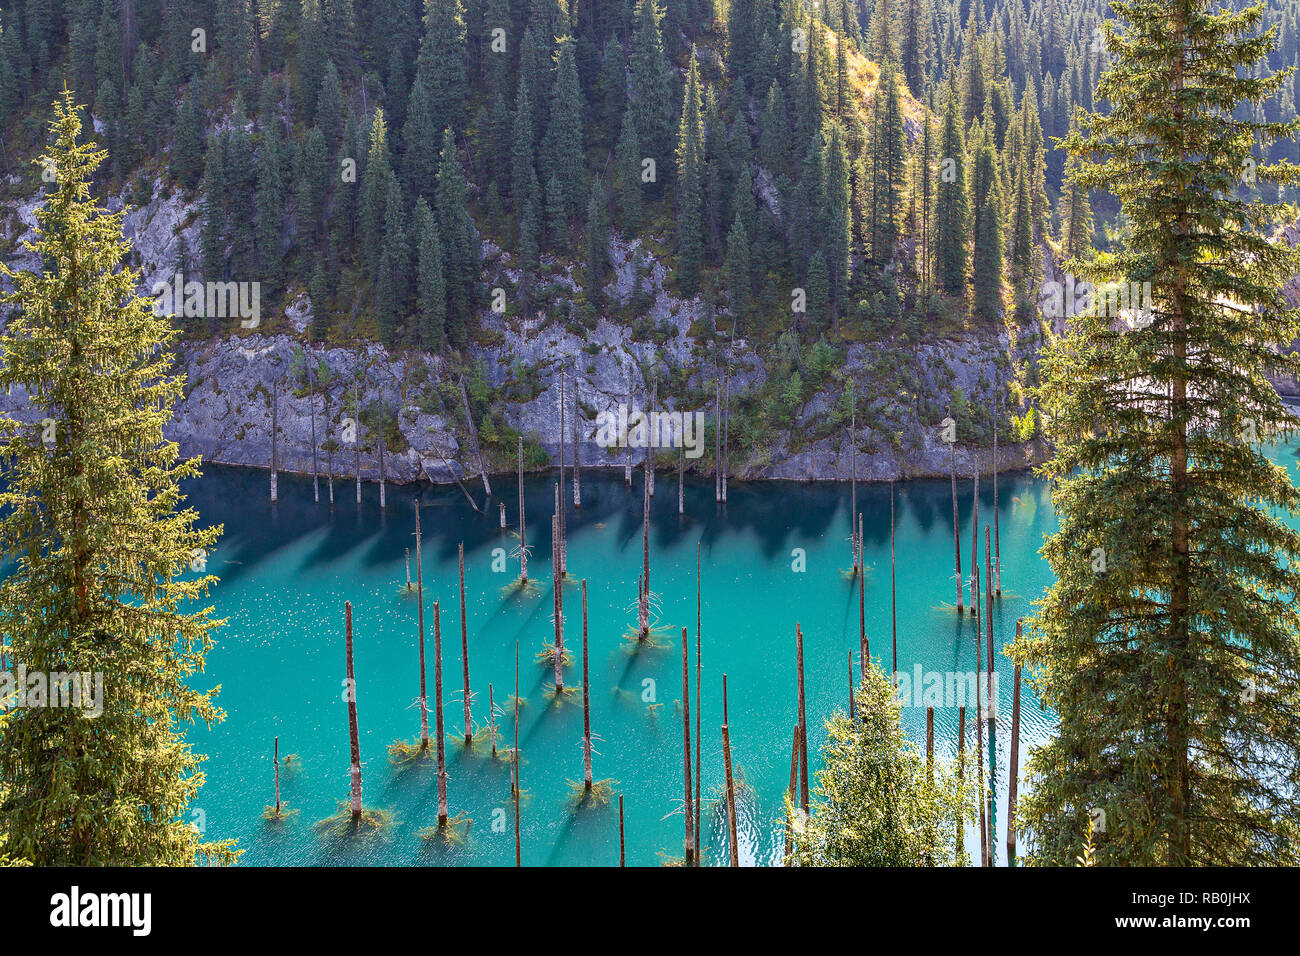 Kaindy Lake in Kazakhstan known also as Birch Tree Lake or Underwater forest, with tree trunks coming out of the water. Stock Photo